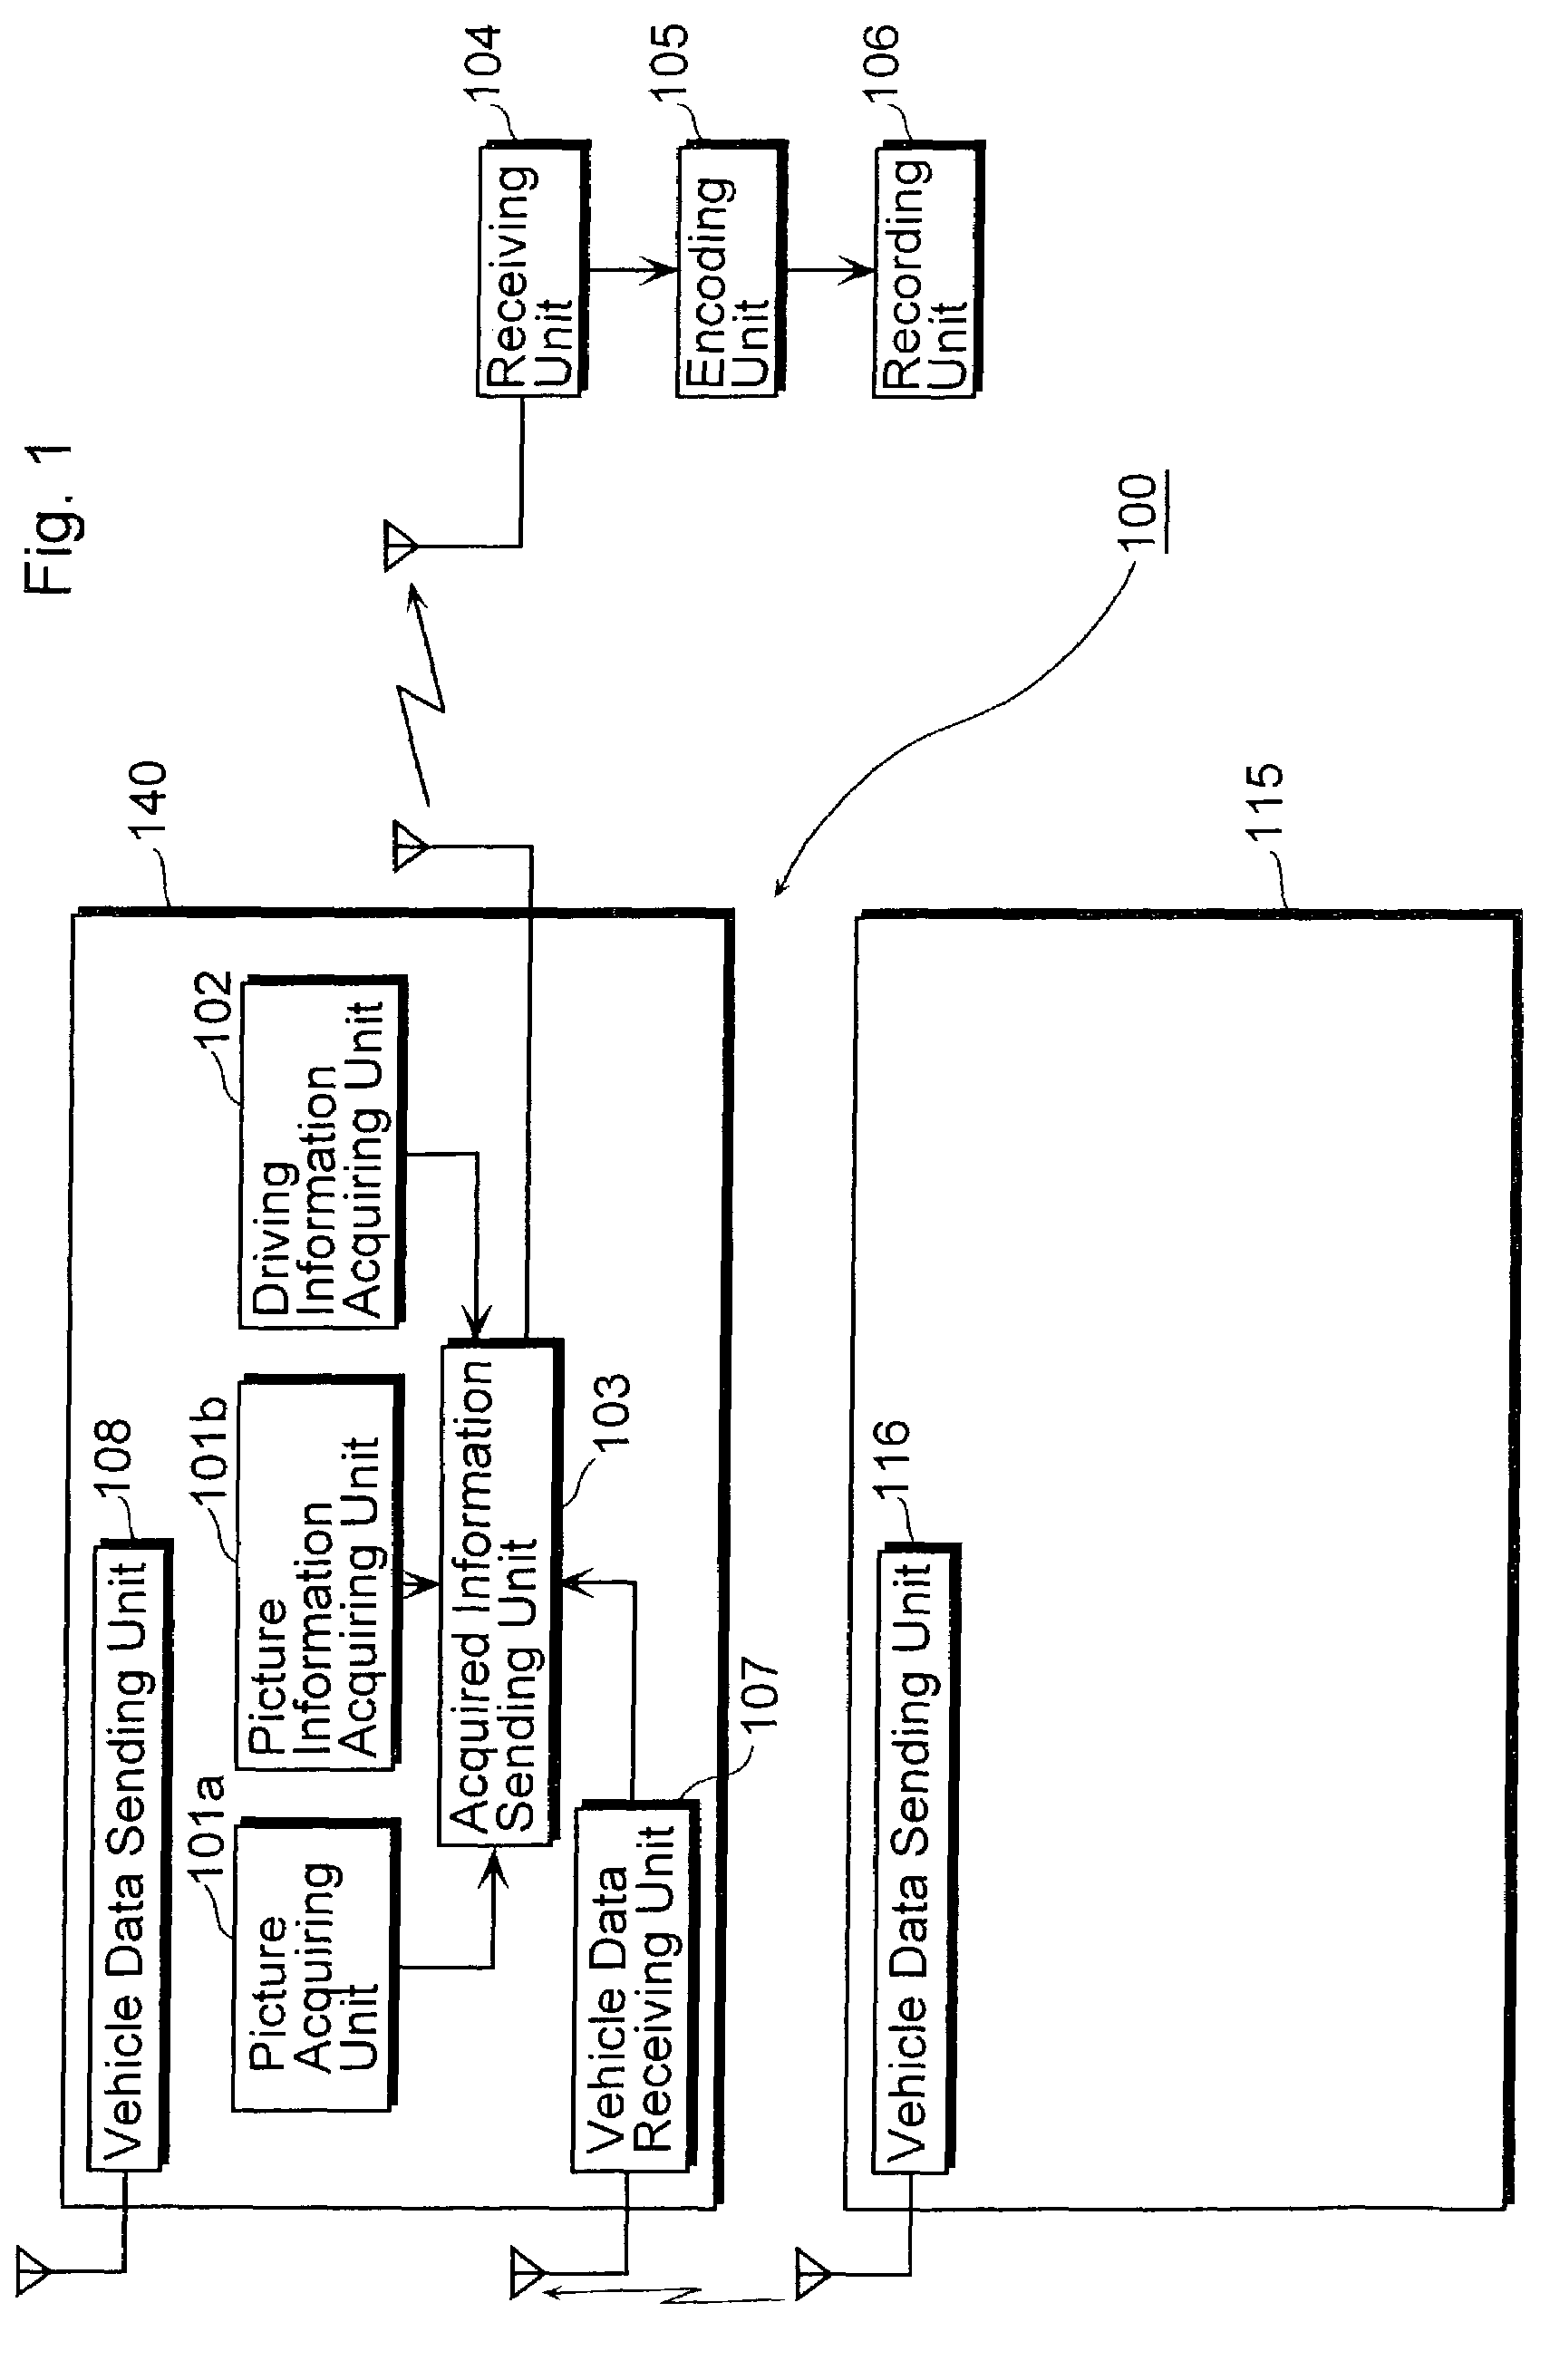 Vehicle information recording system